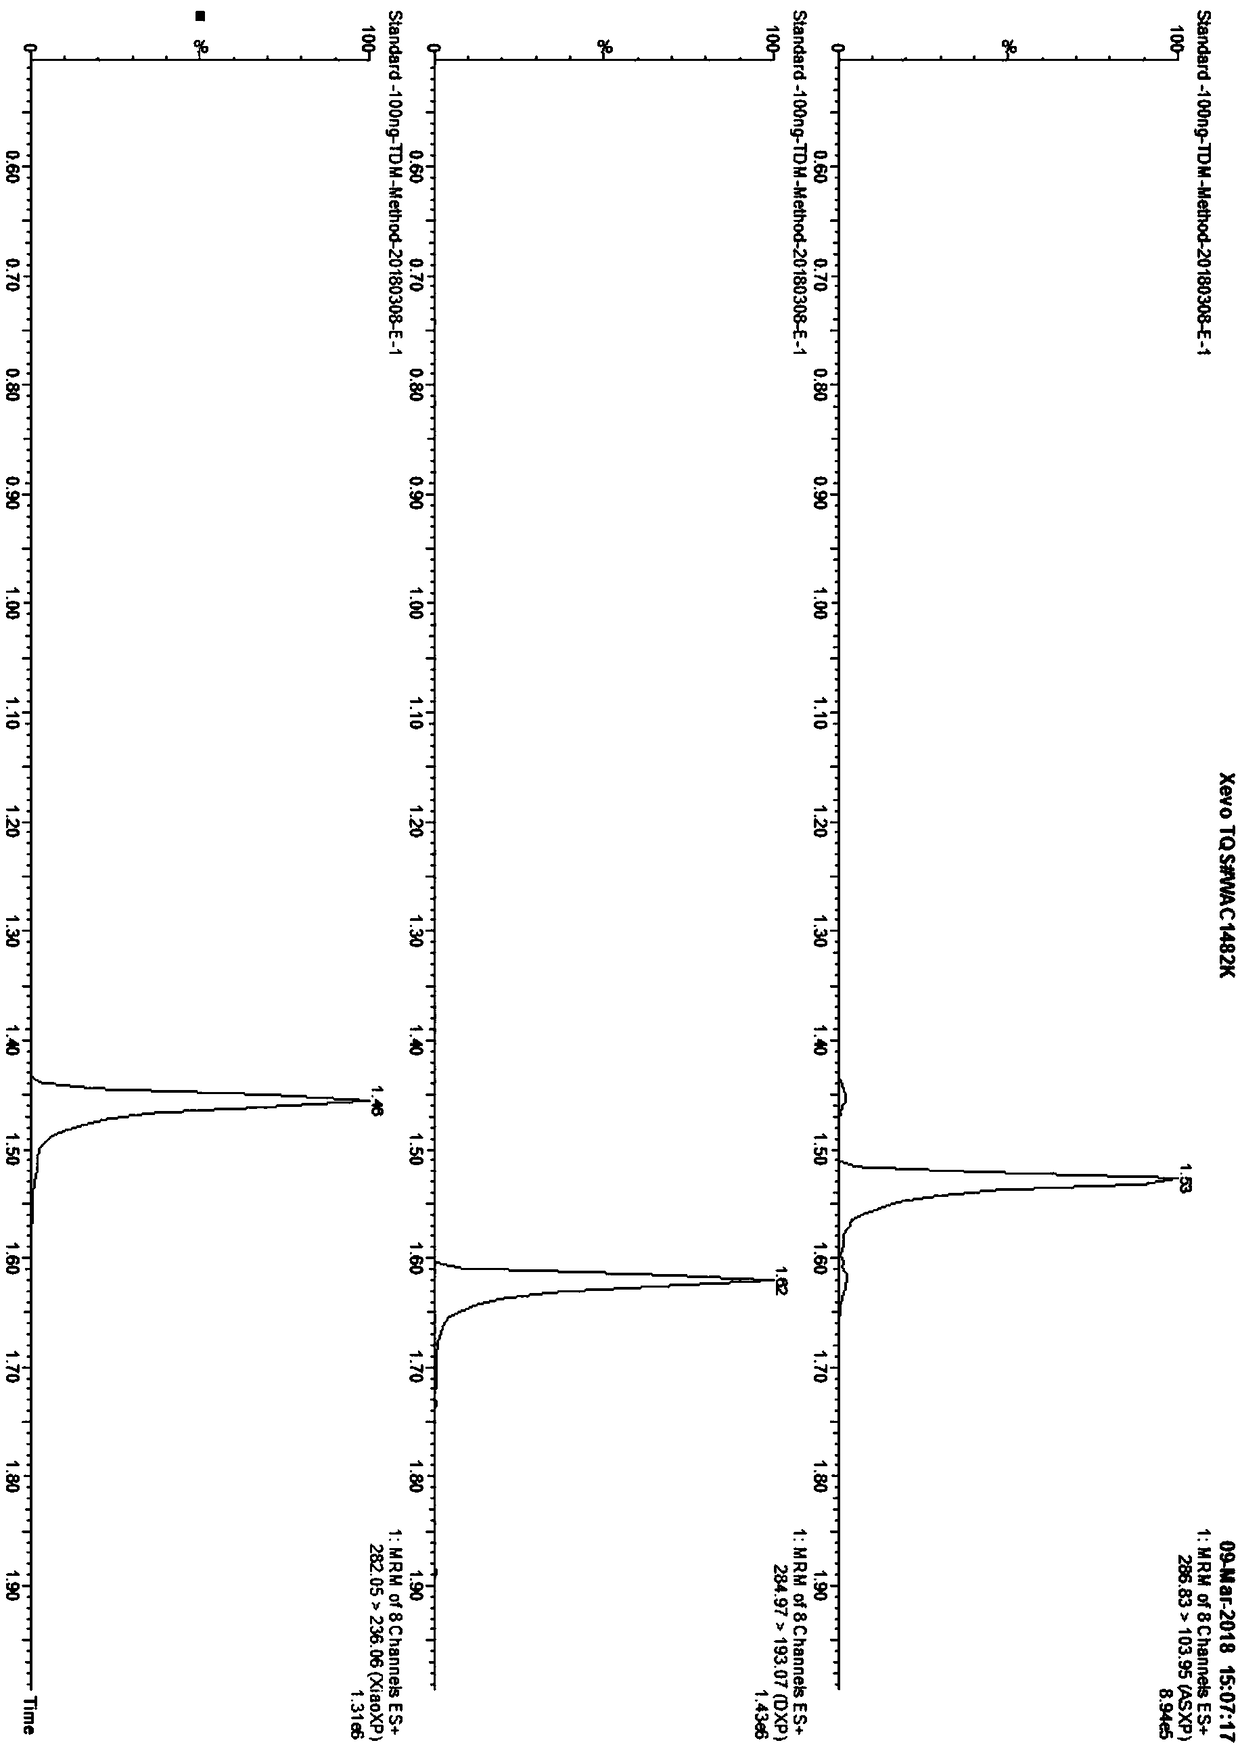 Kit for determining antianxiety/hypnotic type drugs in serum and plasma through liquid chromatography tandem mass spectrometry and application thereof